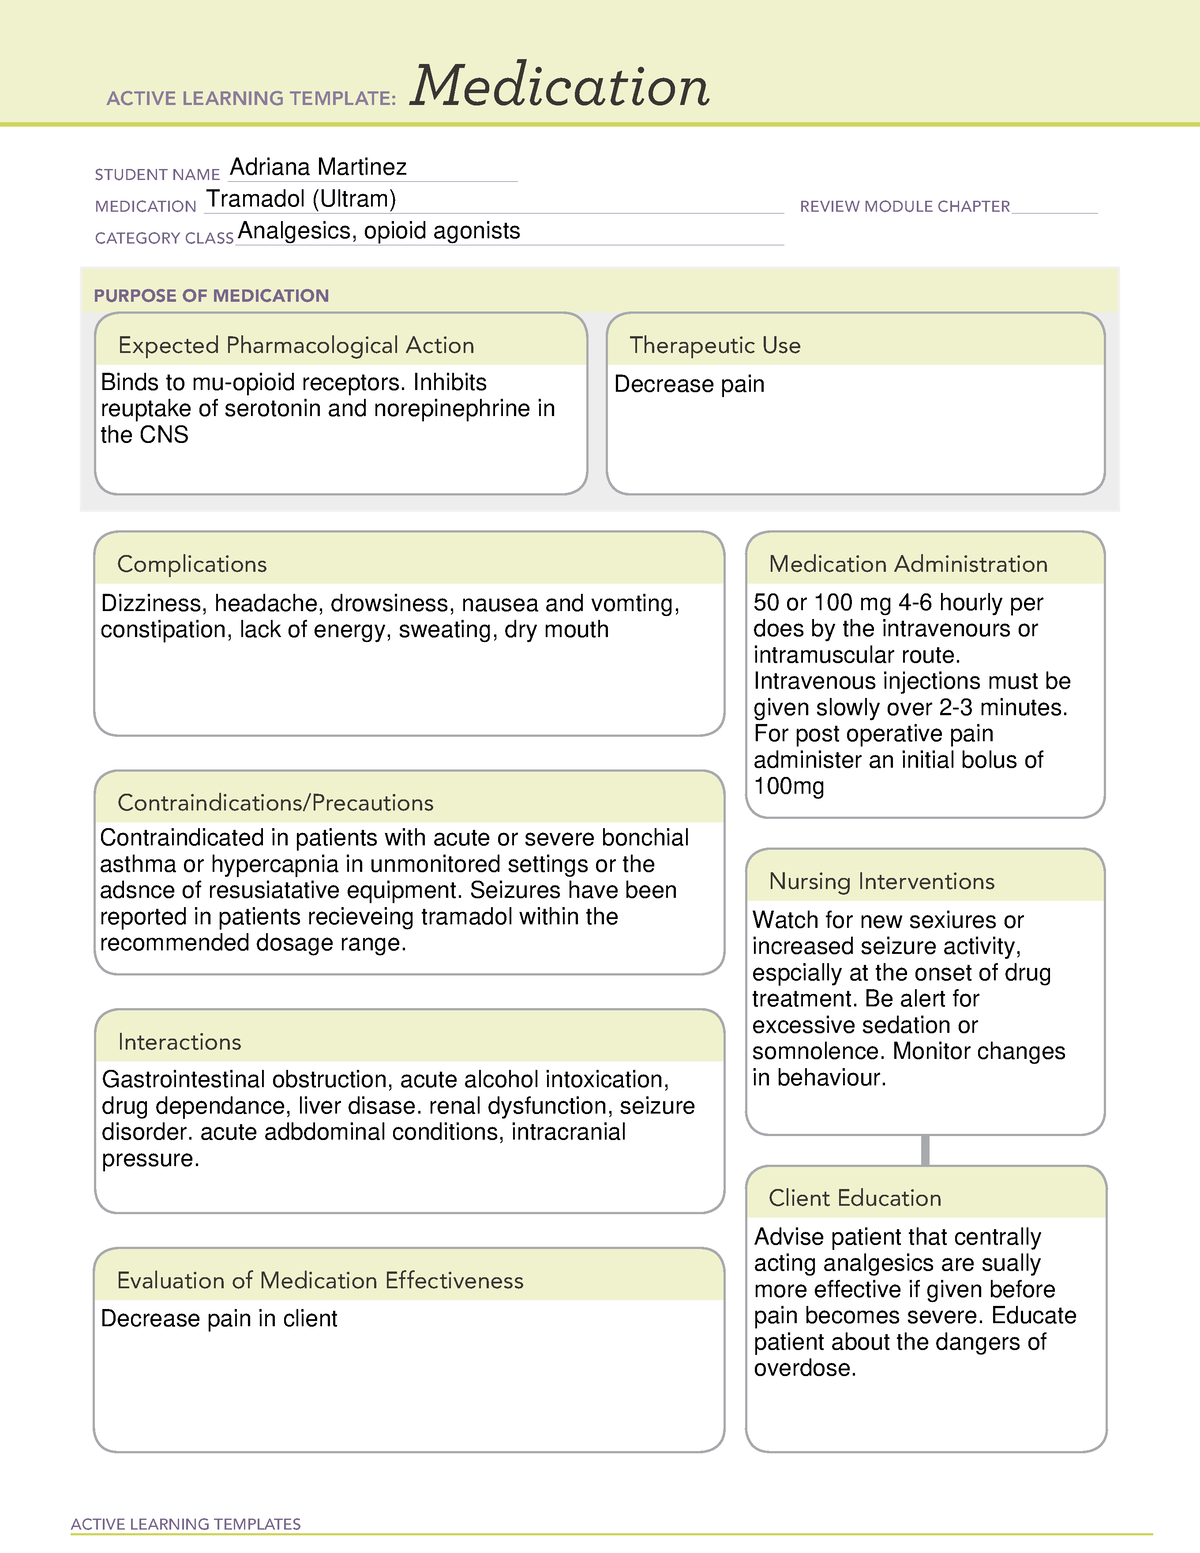 tramadol-med-card-active-learning-templates-medication-student-name